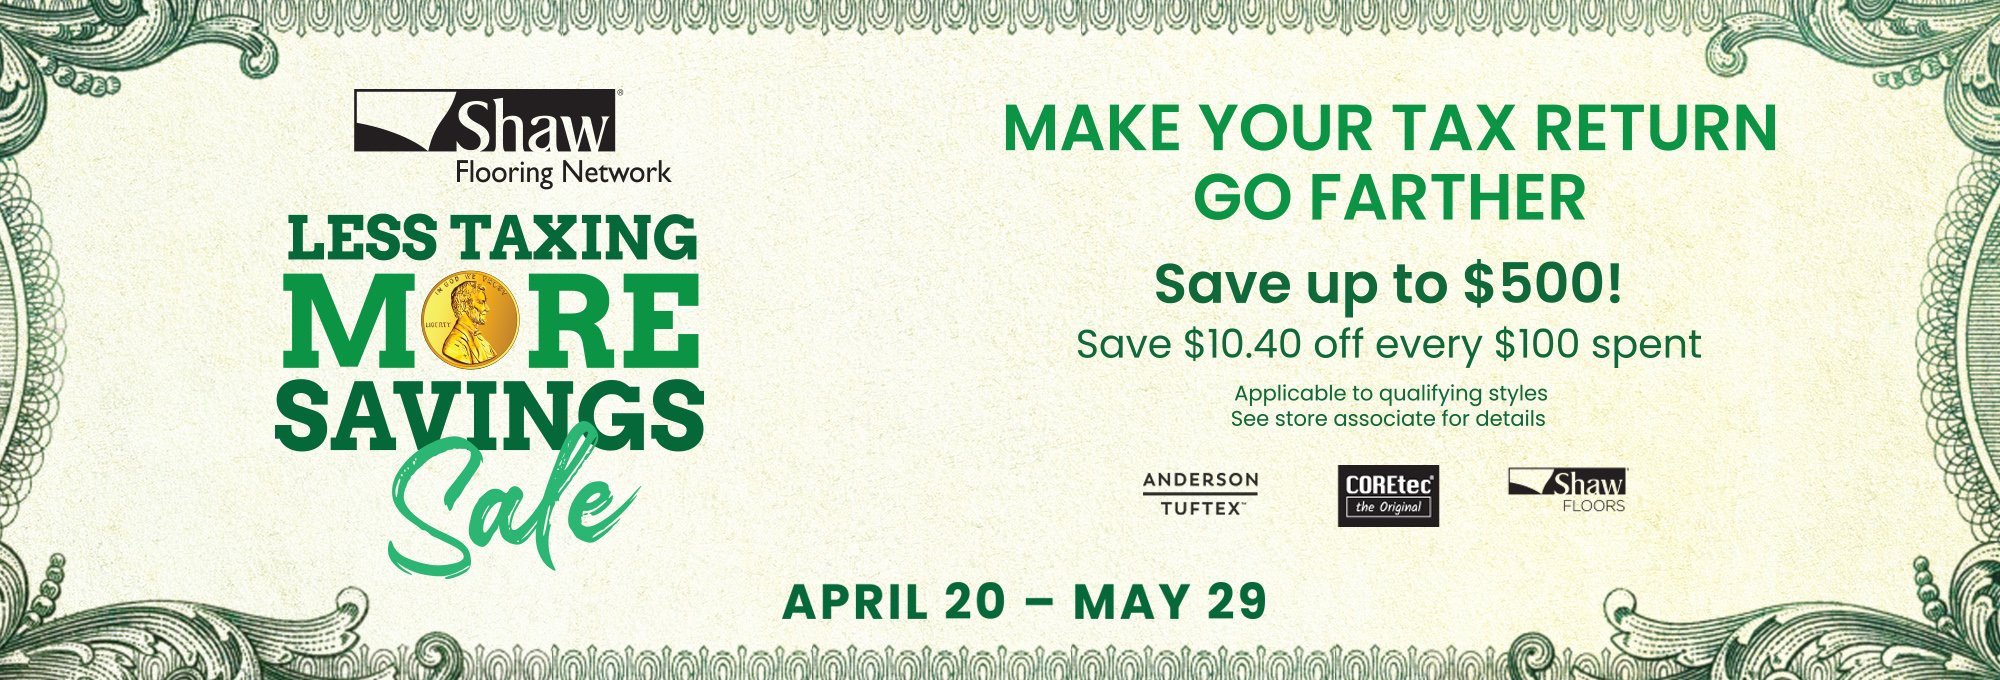 Shaw Flooring - Less Taxing More Savings Promotional Hero Banner With Link